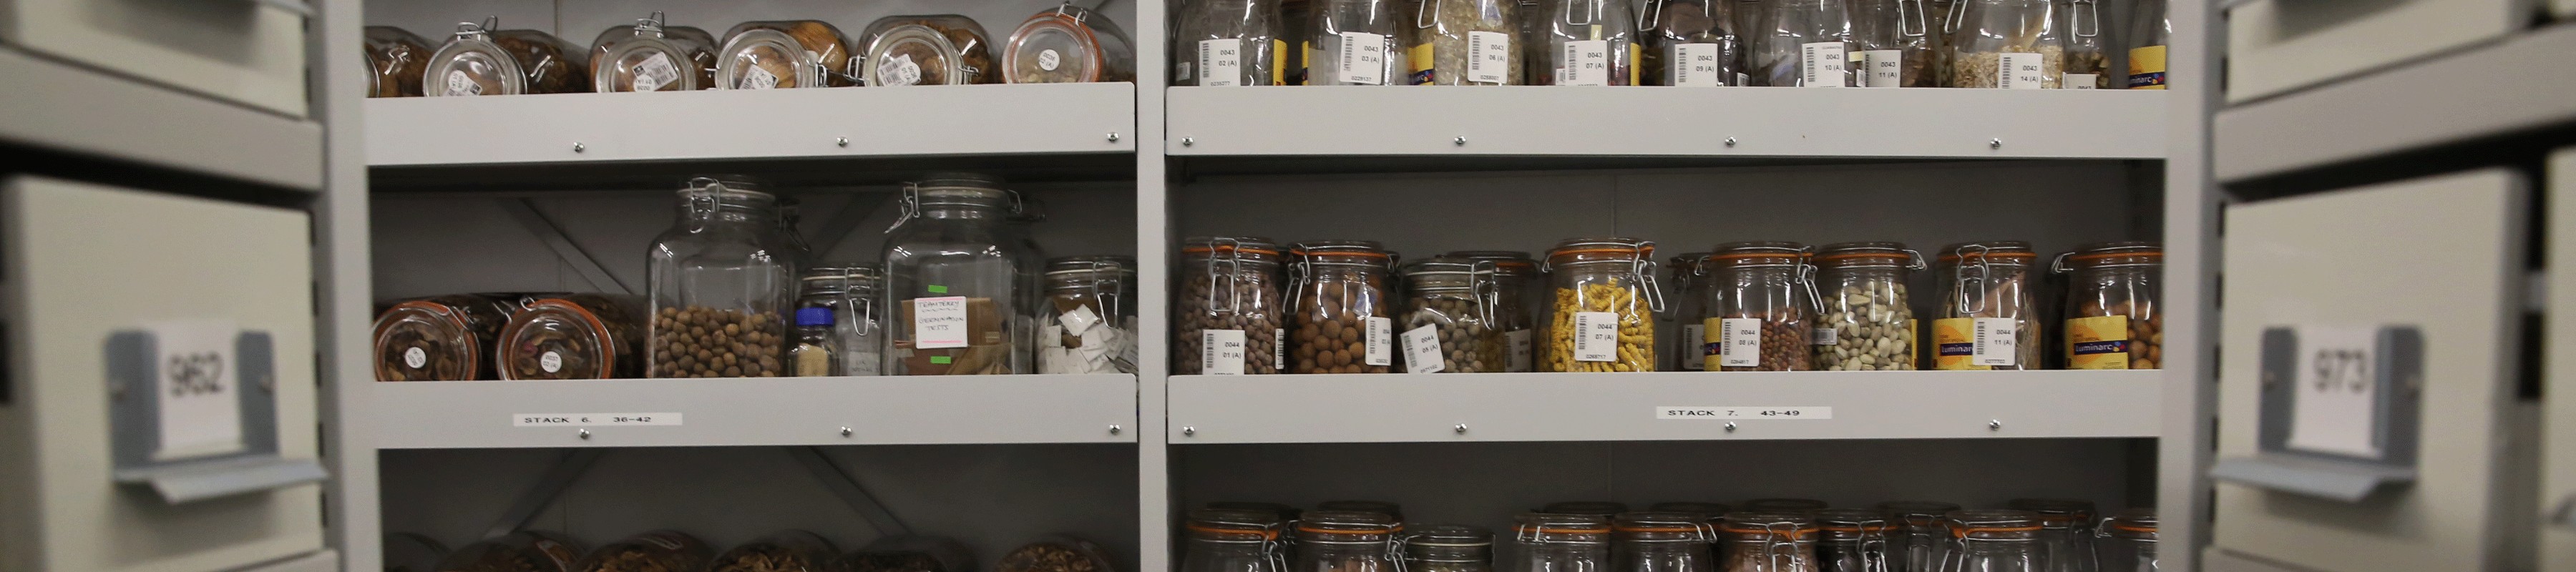 Shelves of seeds in jars contained in the Millennium Seed Bank